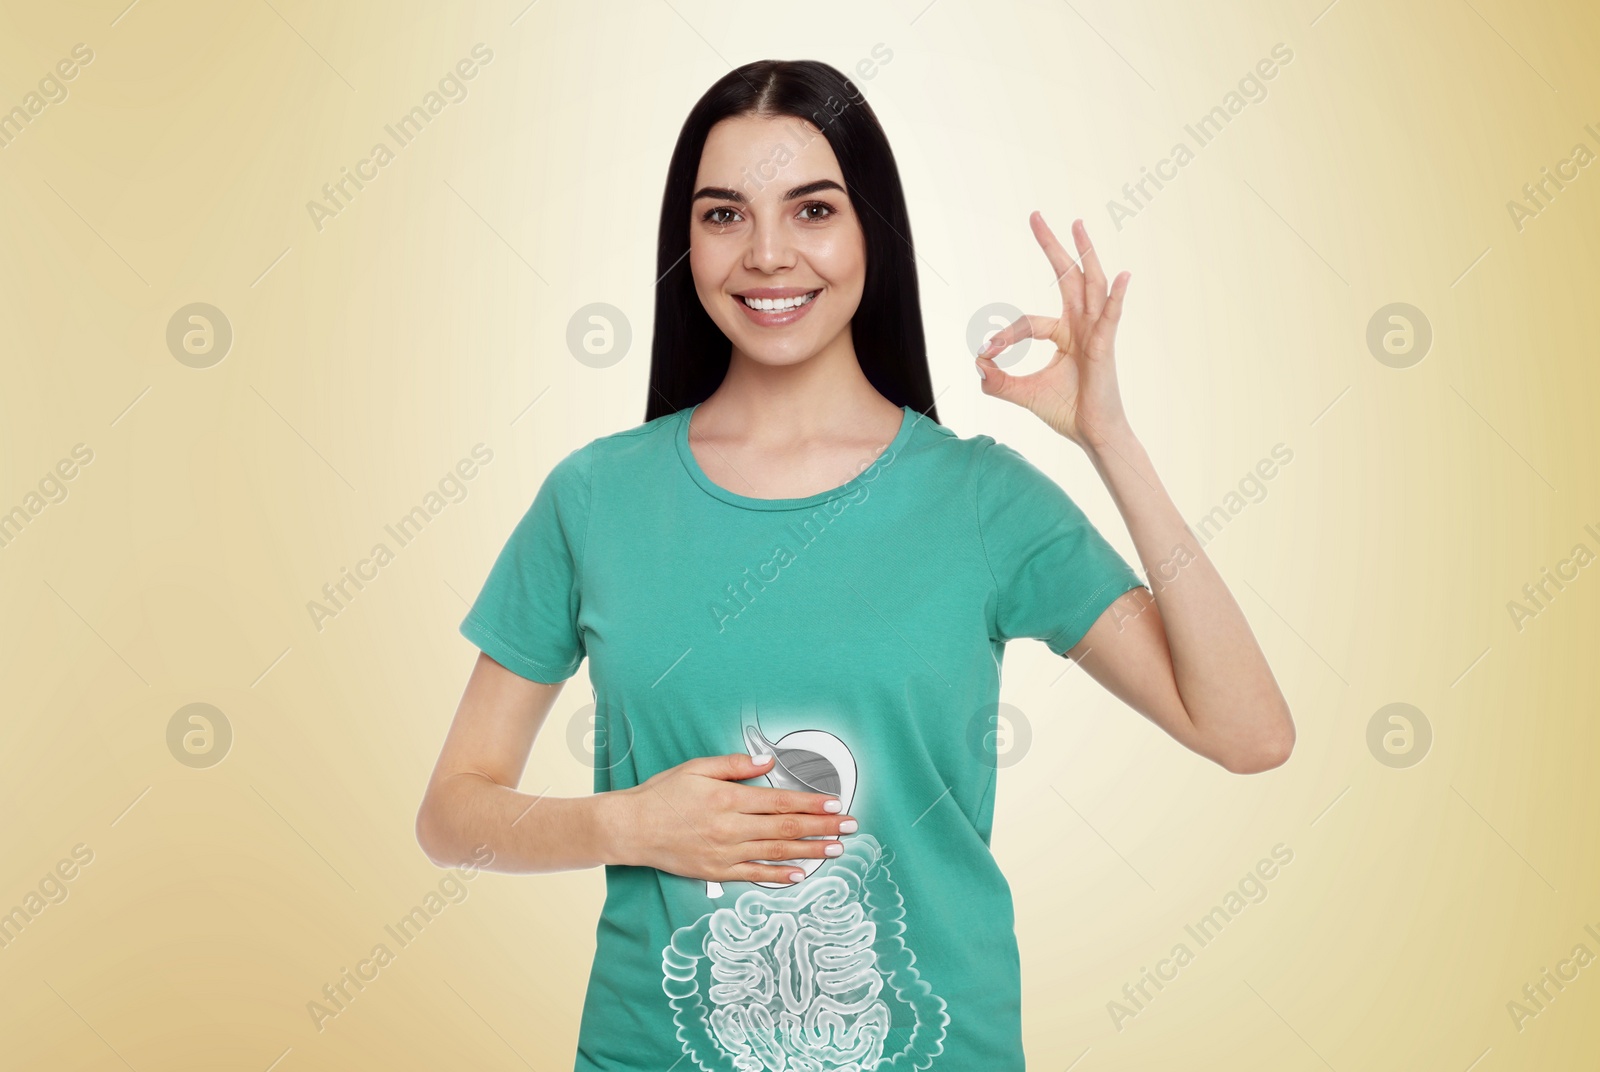 Image of Happy woman with healthy digestive system on light yellow background. Illustration of gastrointestinal tract